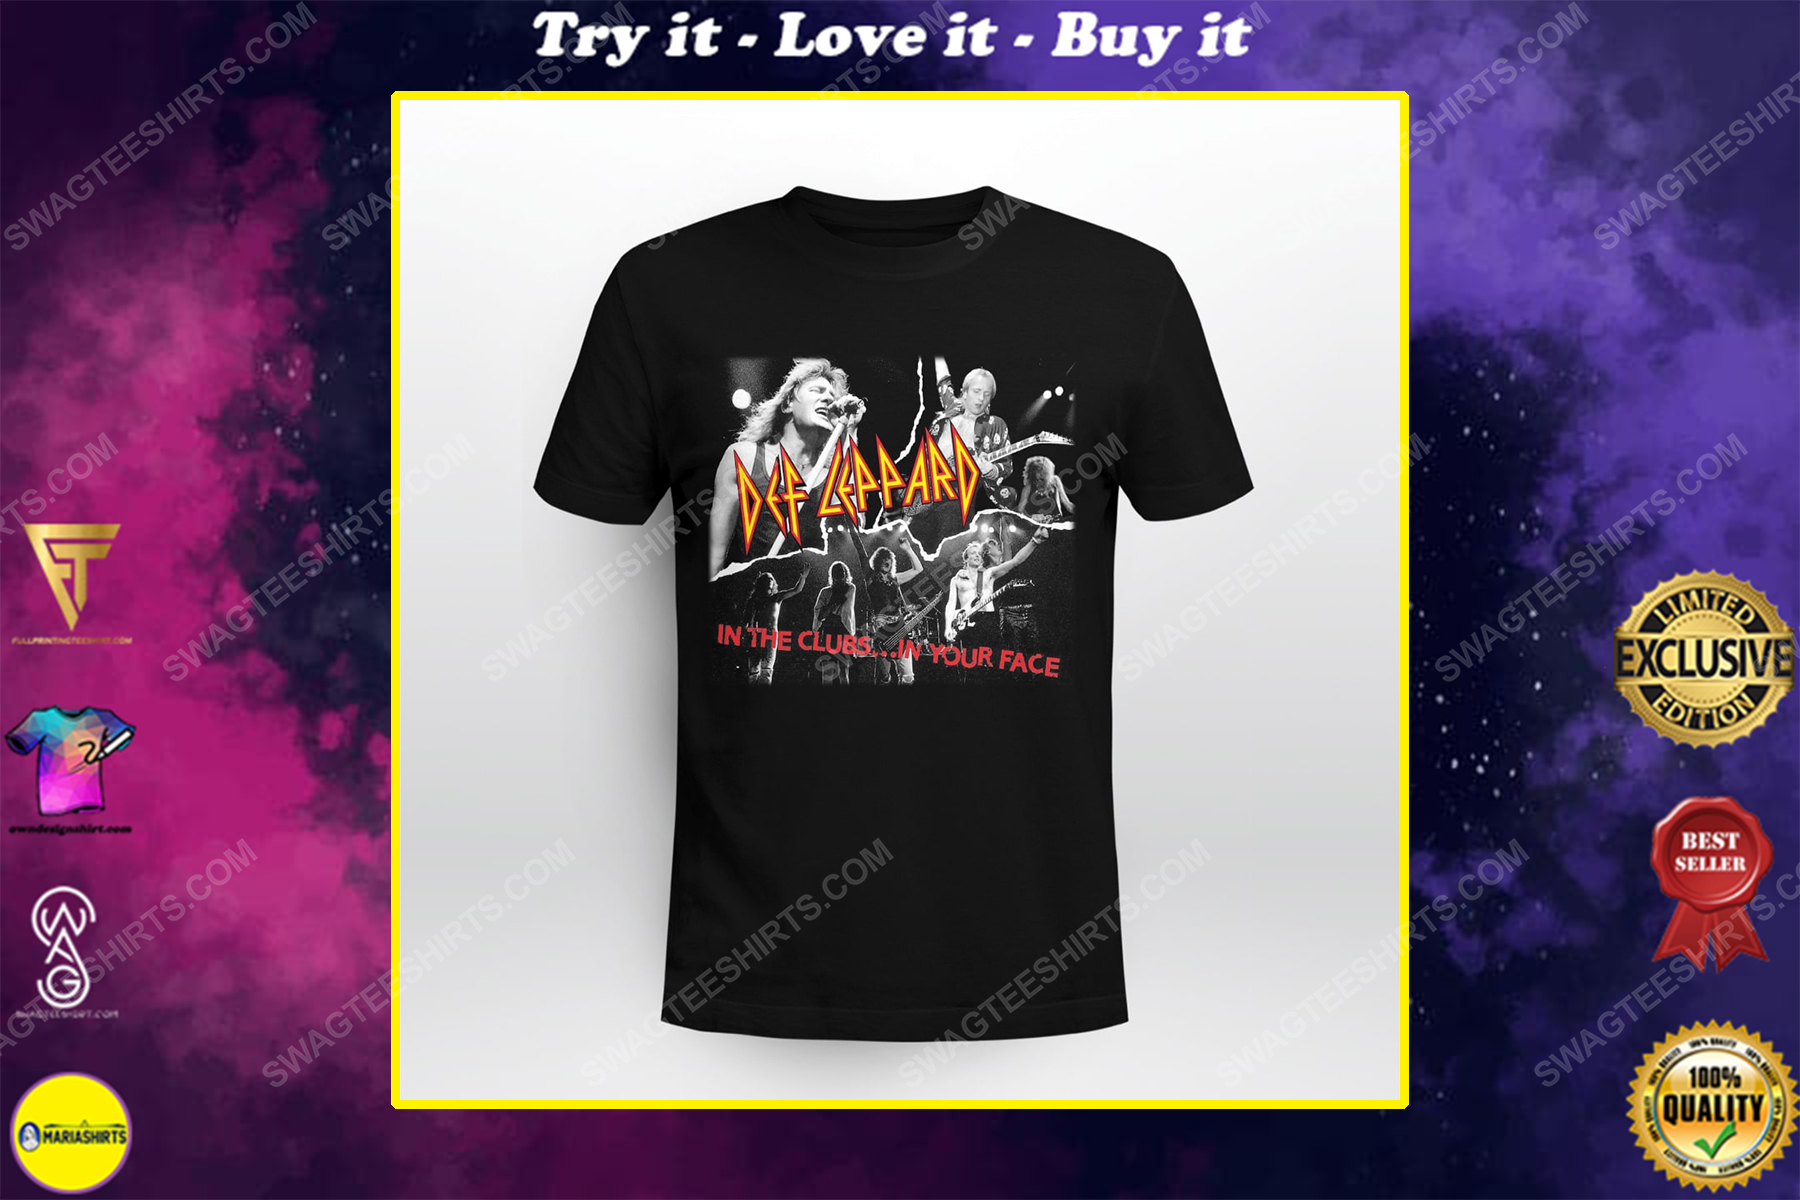 Def leppard in the clubs in your face vintage shirt